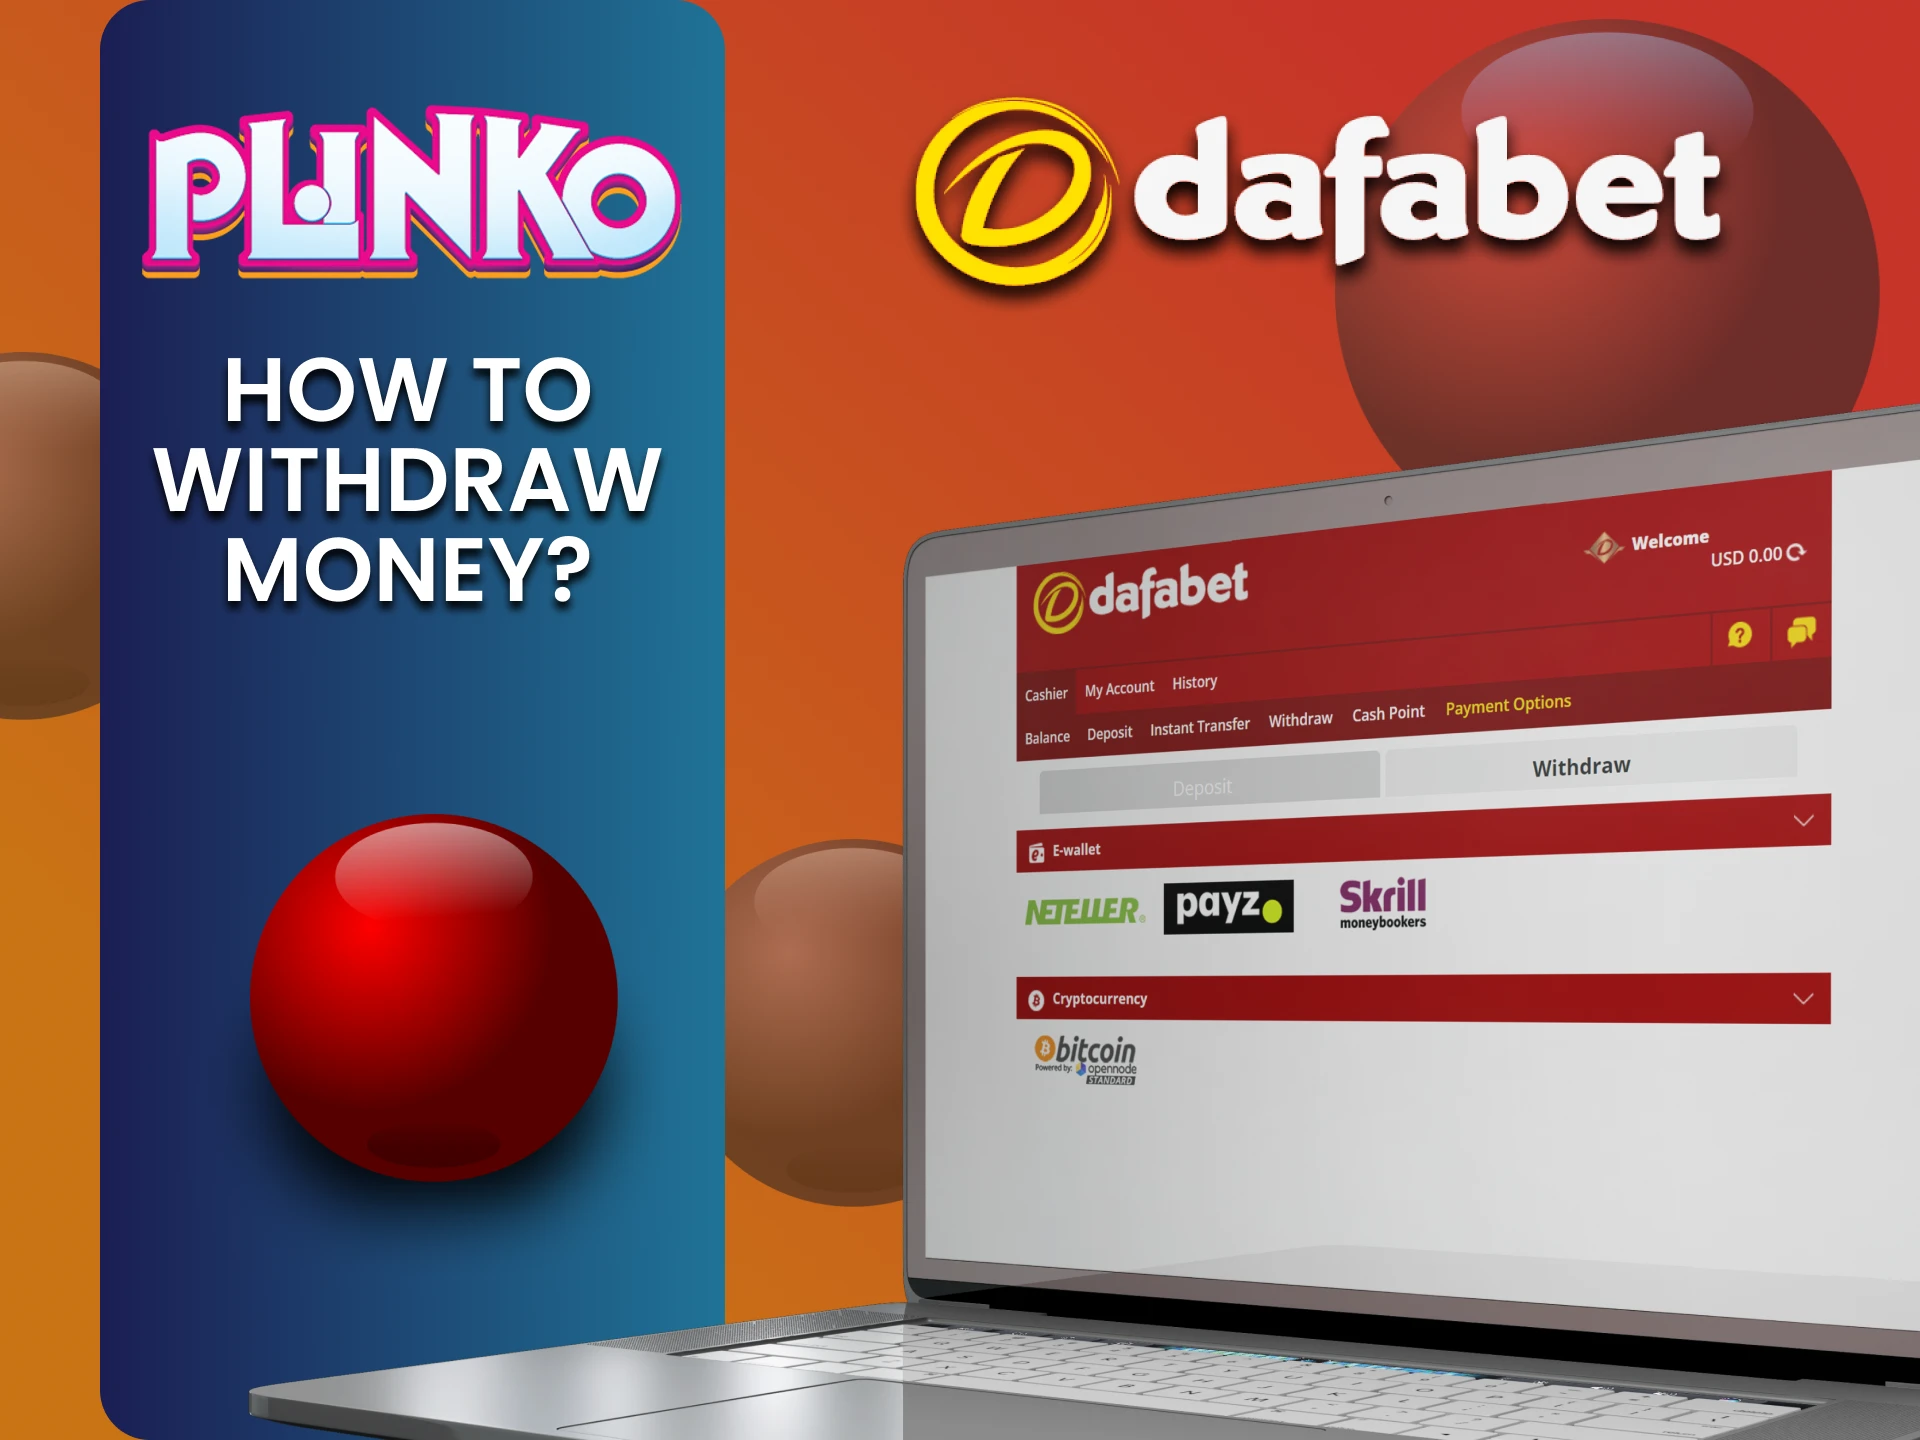 We will tell you how to withdraw funds for the Plinko game on Dafabet.